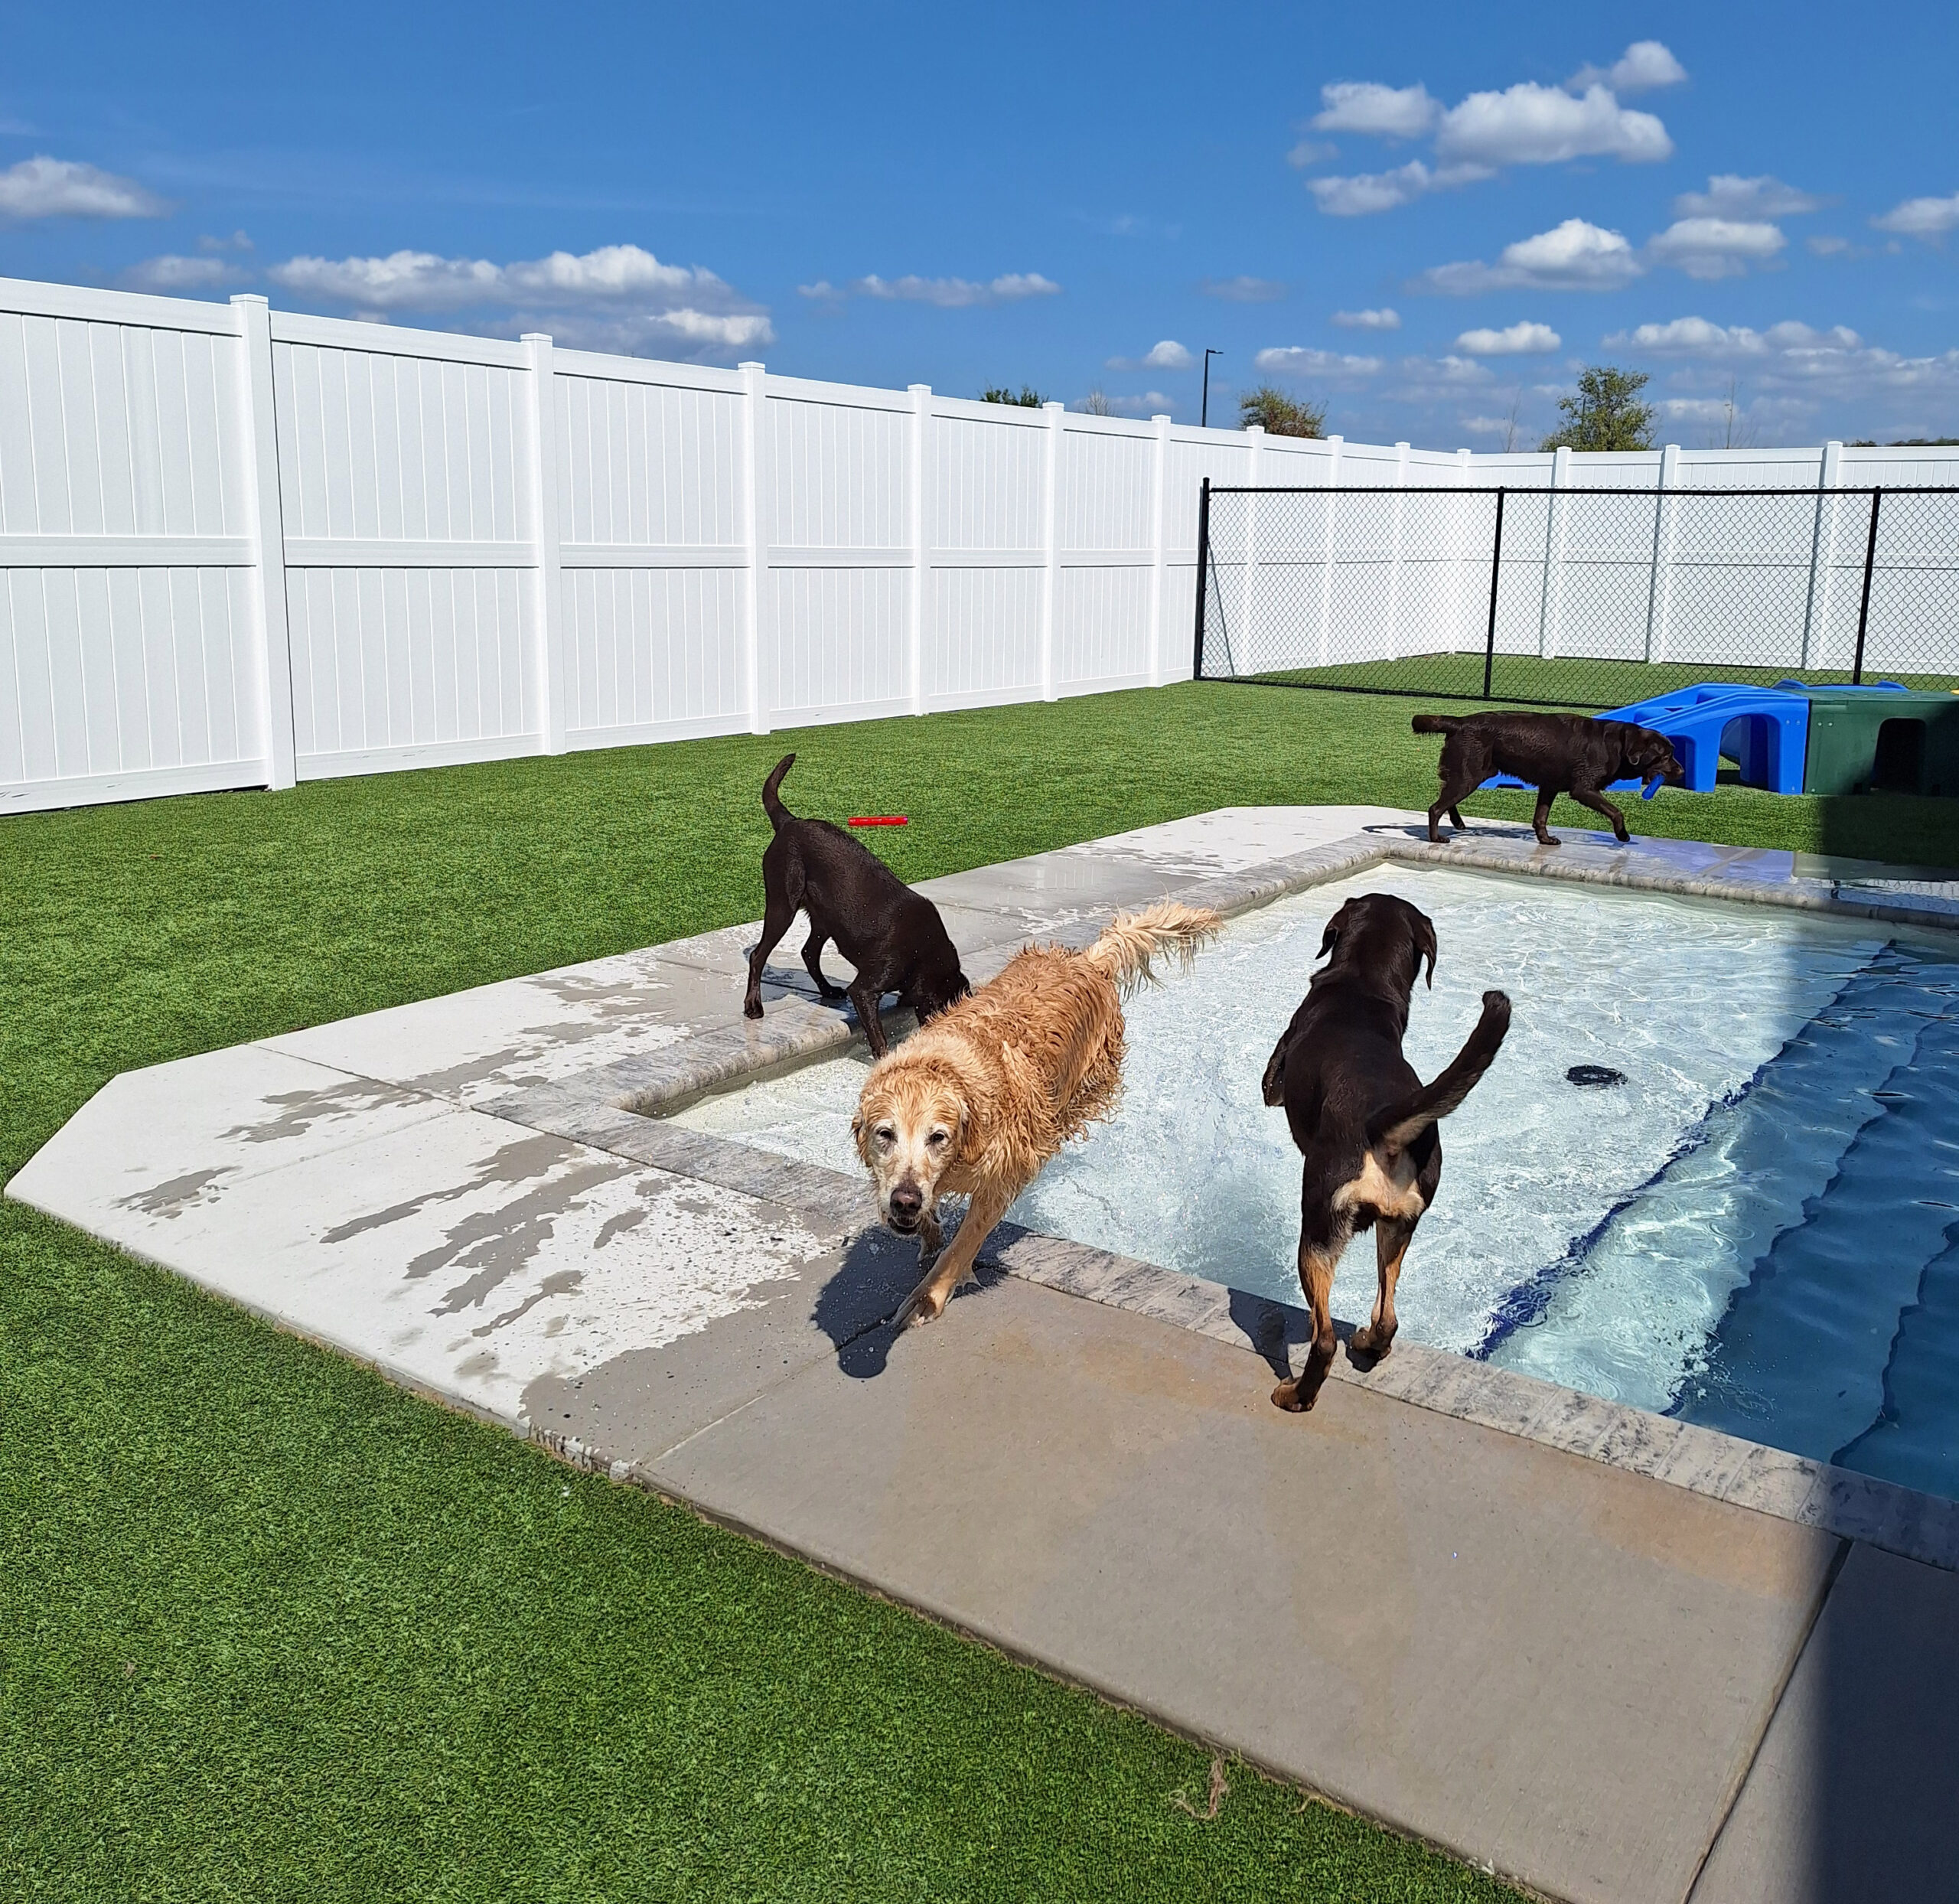 Dogs are playing in the pool.